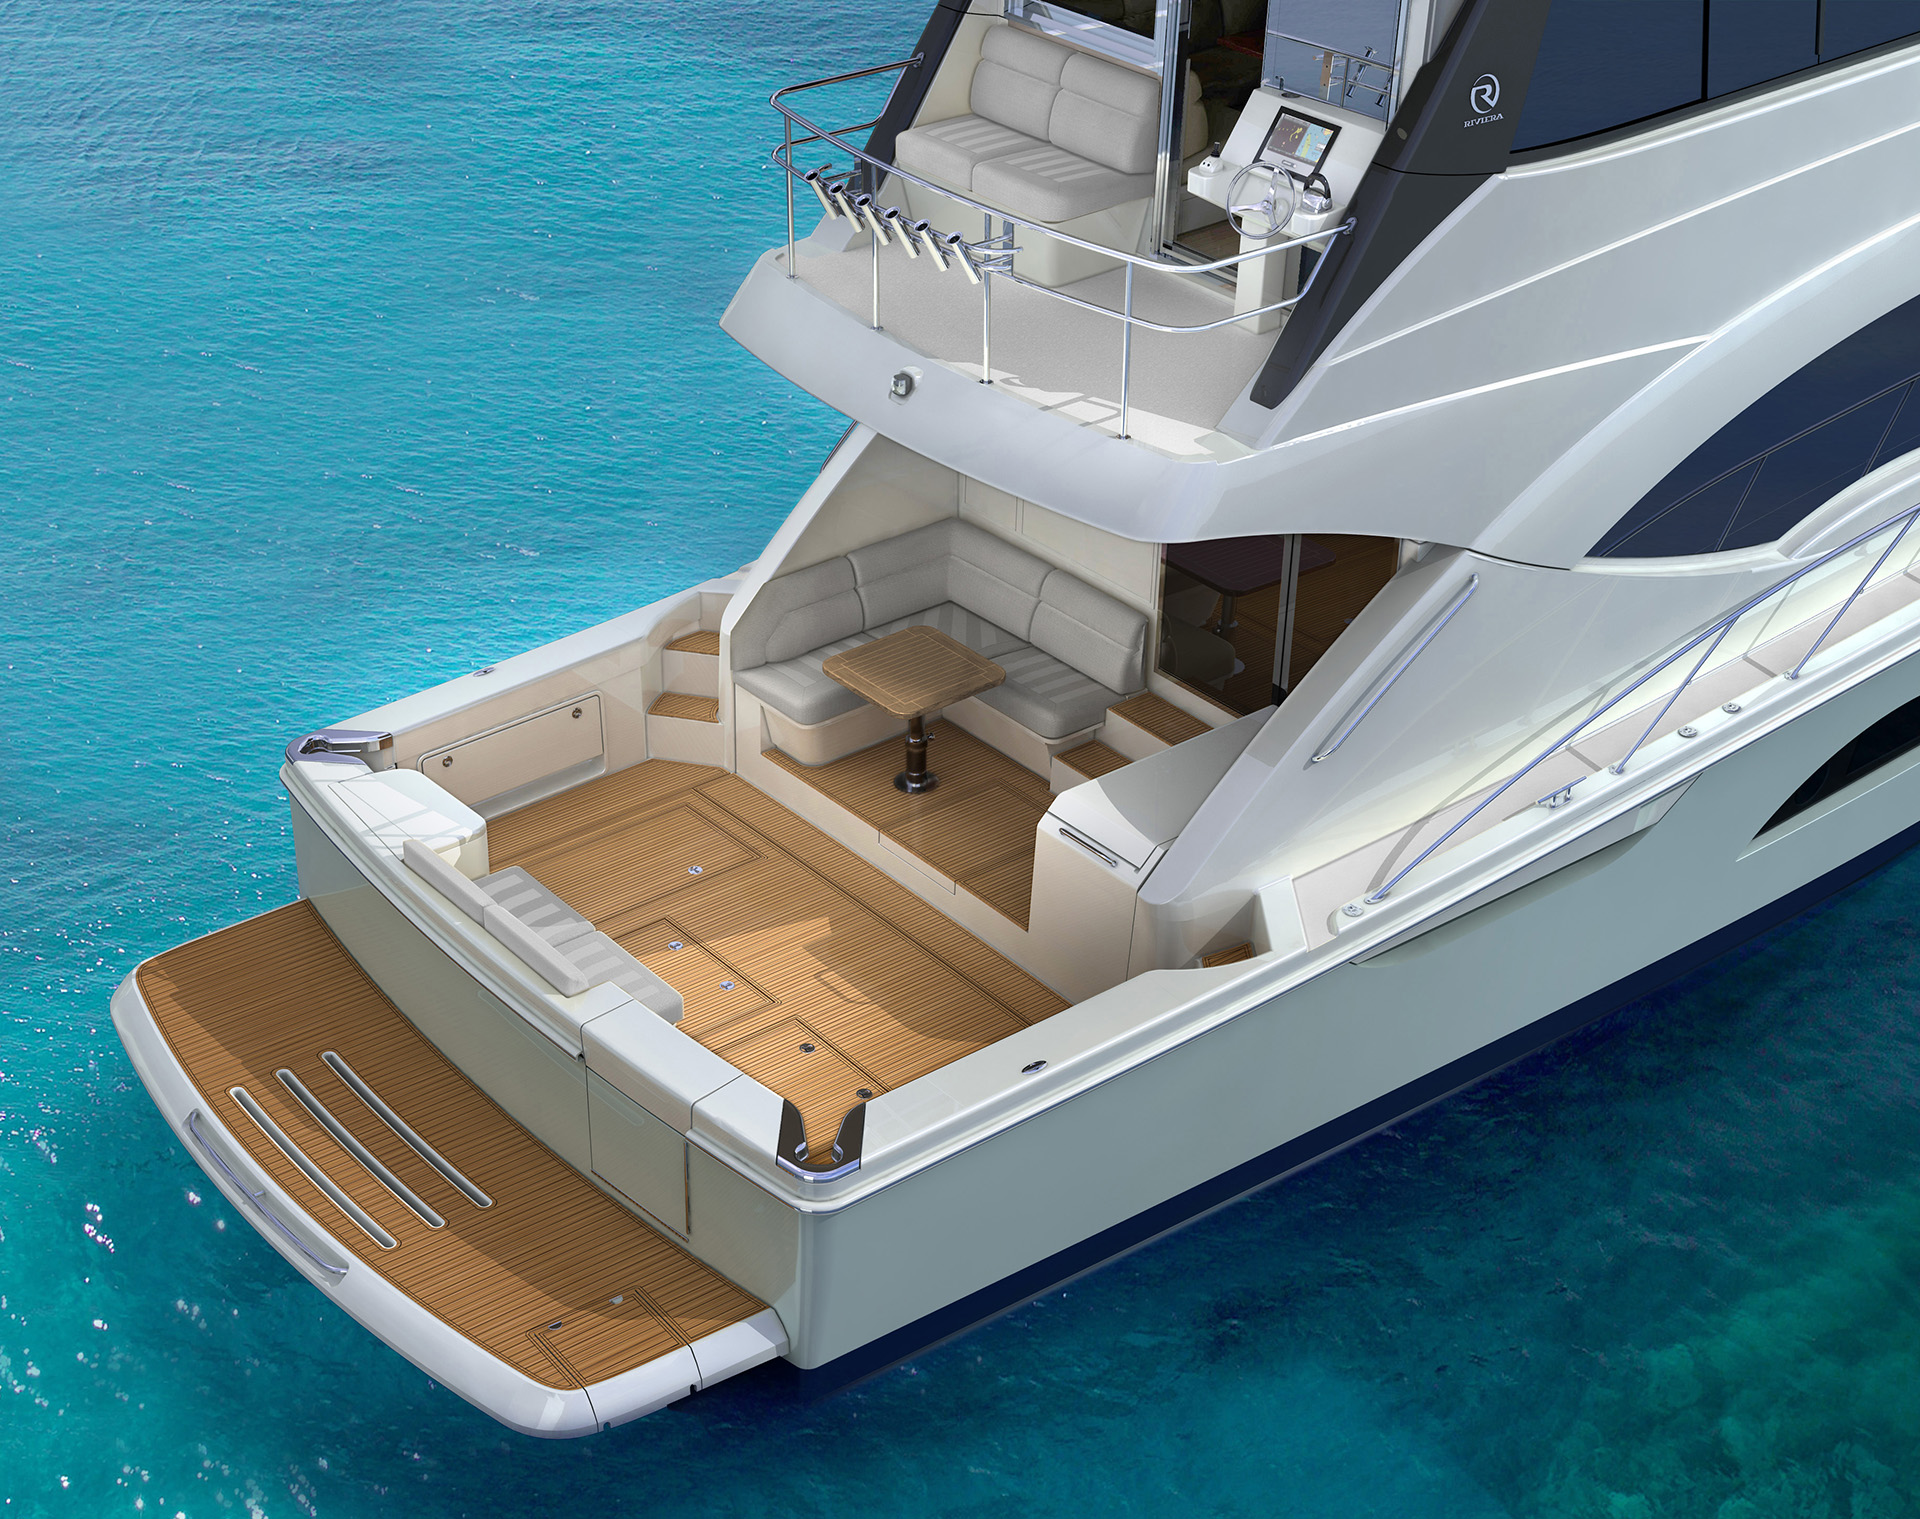 With a new and distinctive design, the Riviera 57 Enclosed Flybridge retains the indoor outdoor characteristics and cockpit connectivity of which Riviera has made an art form-2